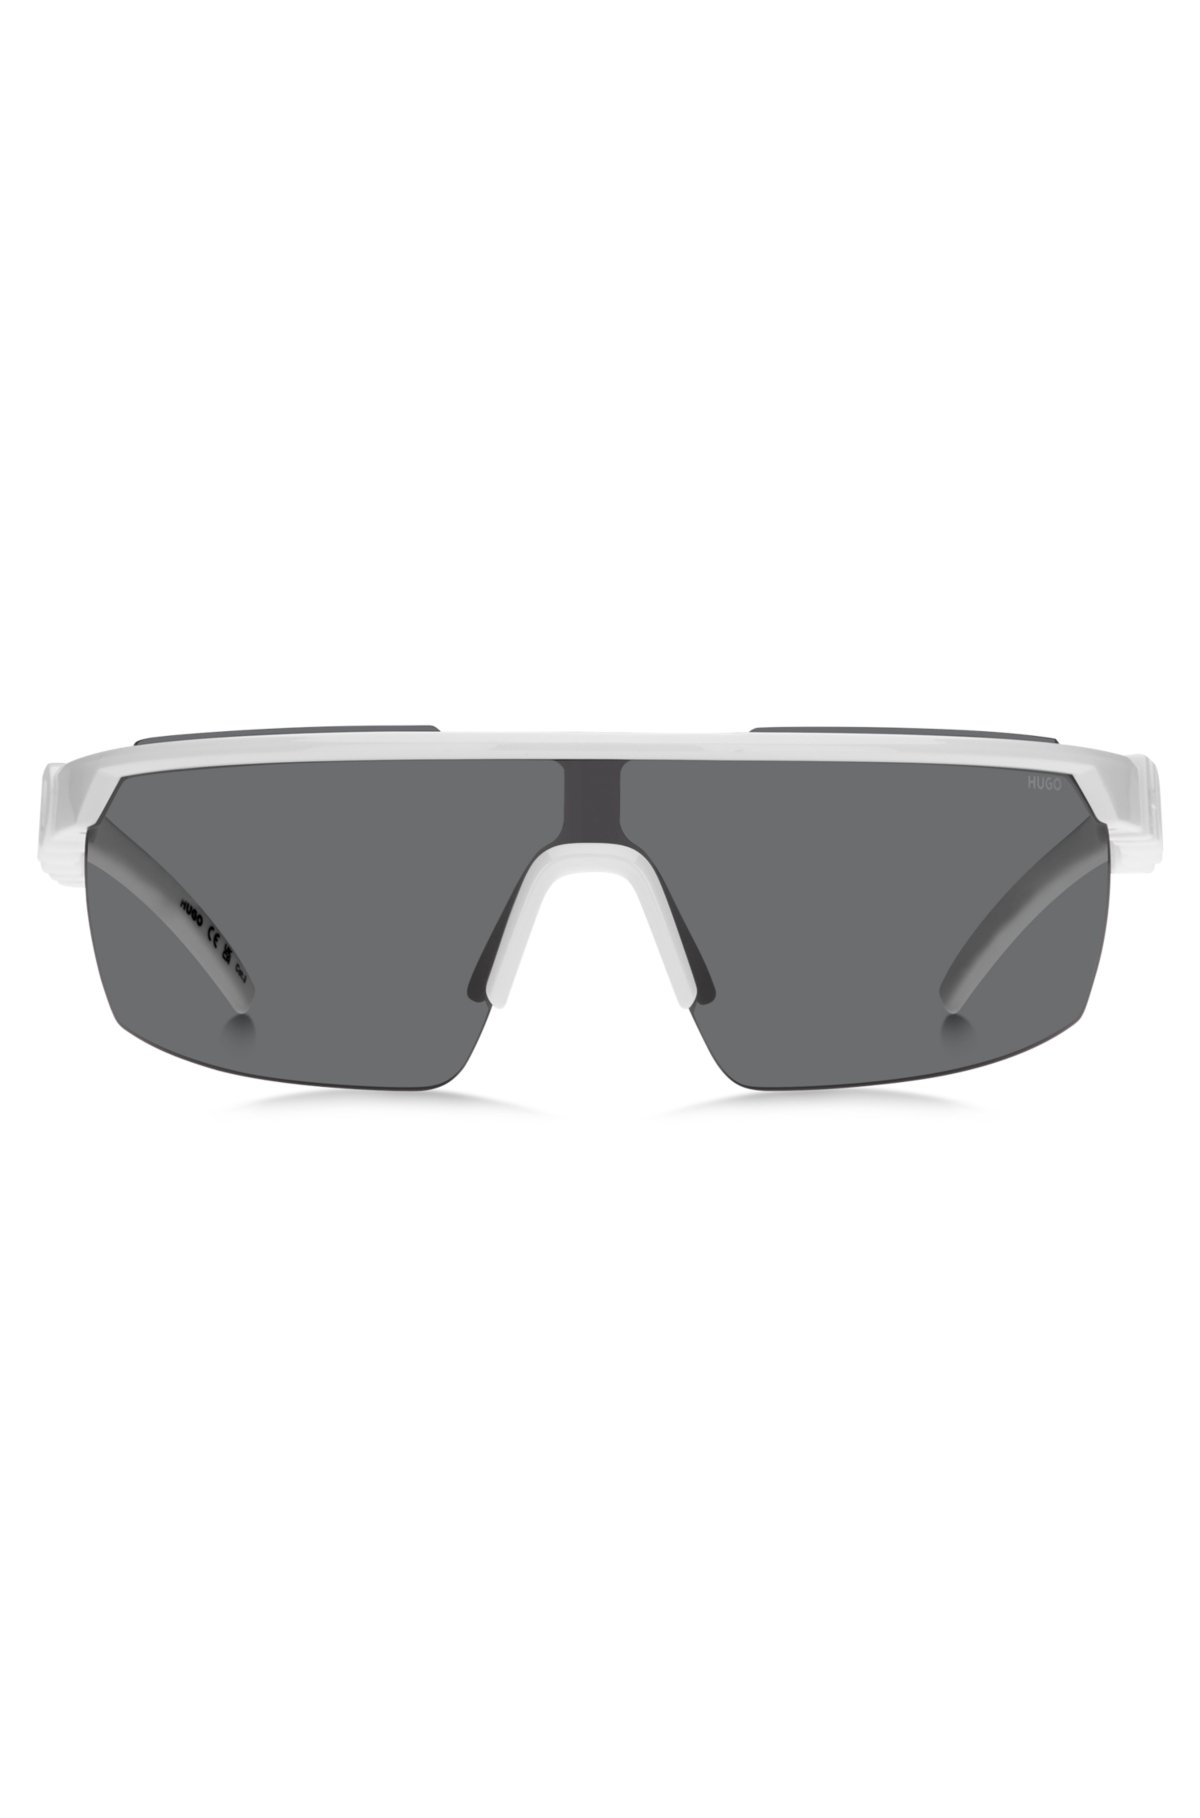 Mask-style sunglasses in white with 3D-logo temples, White